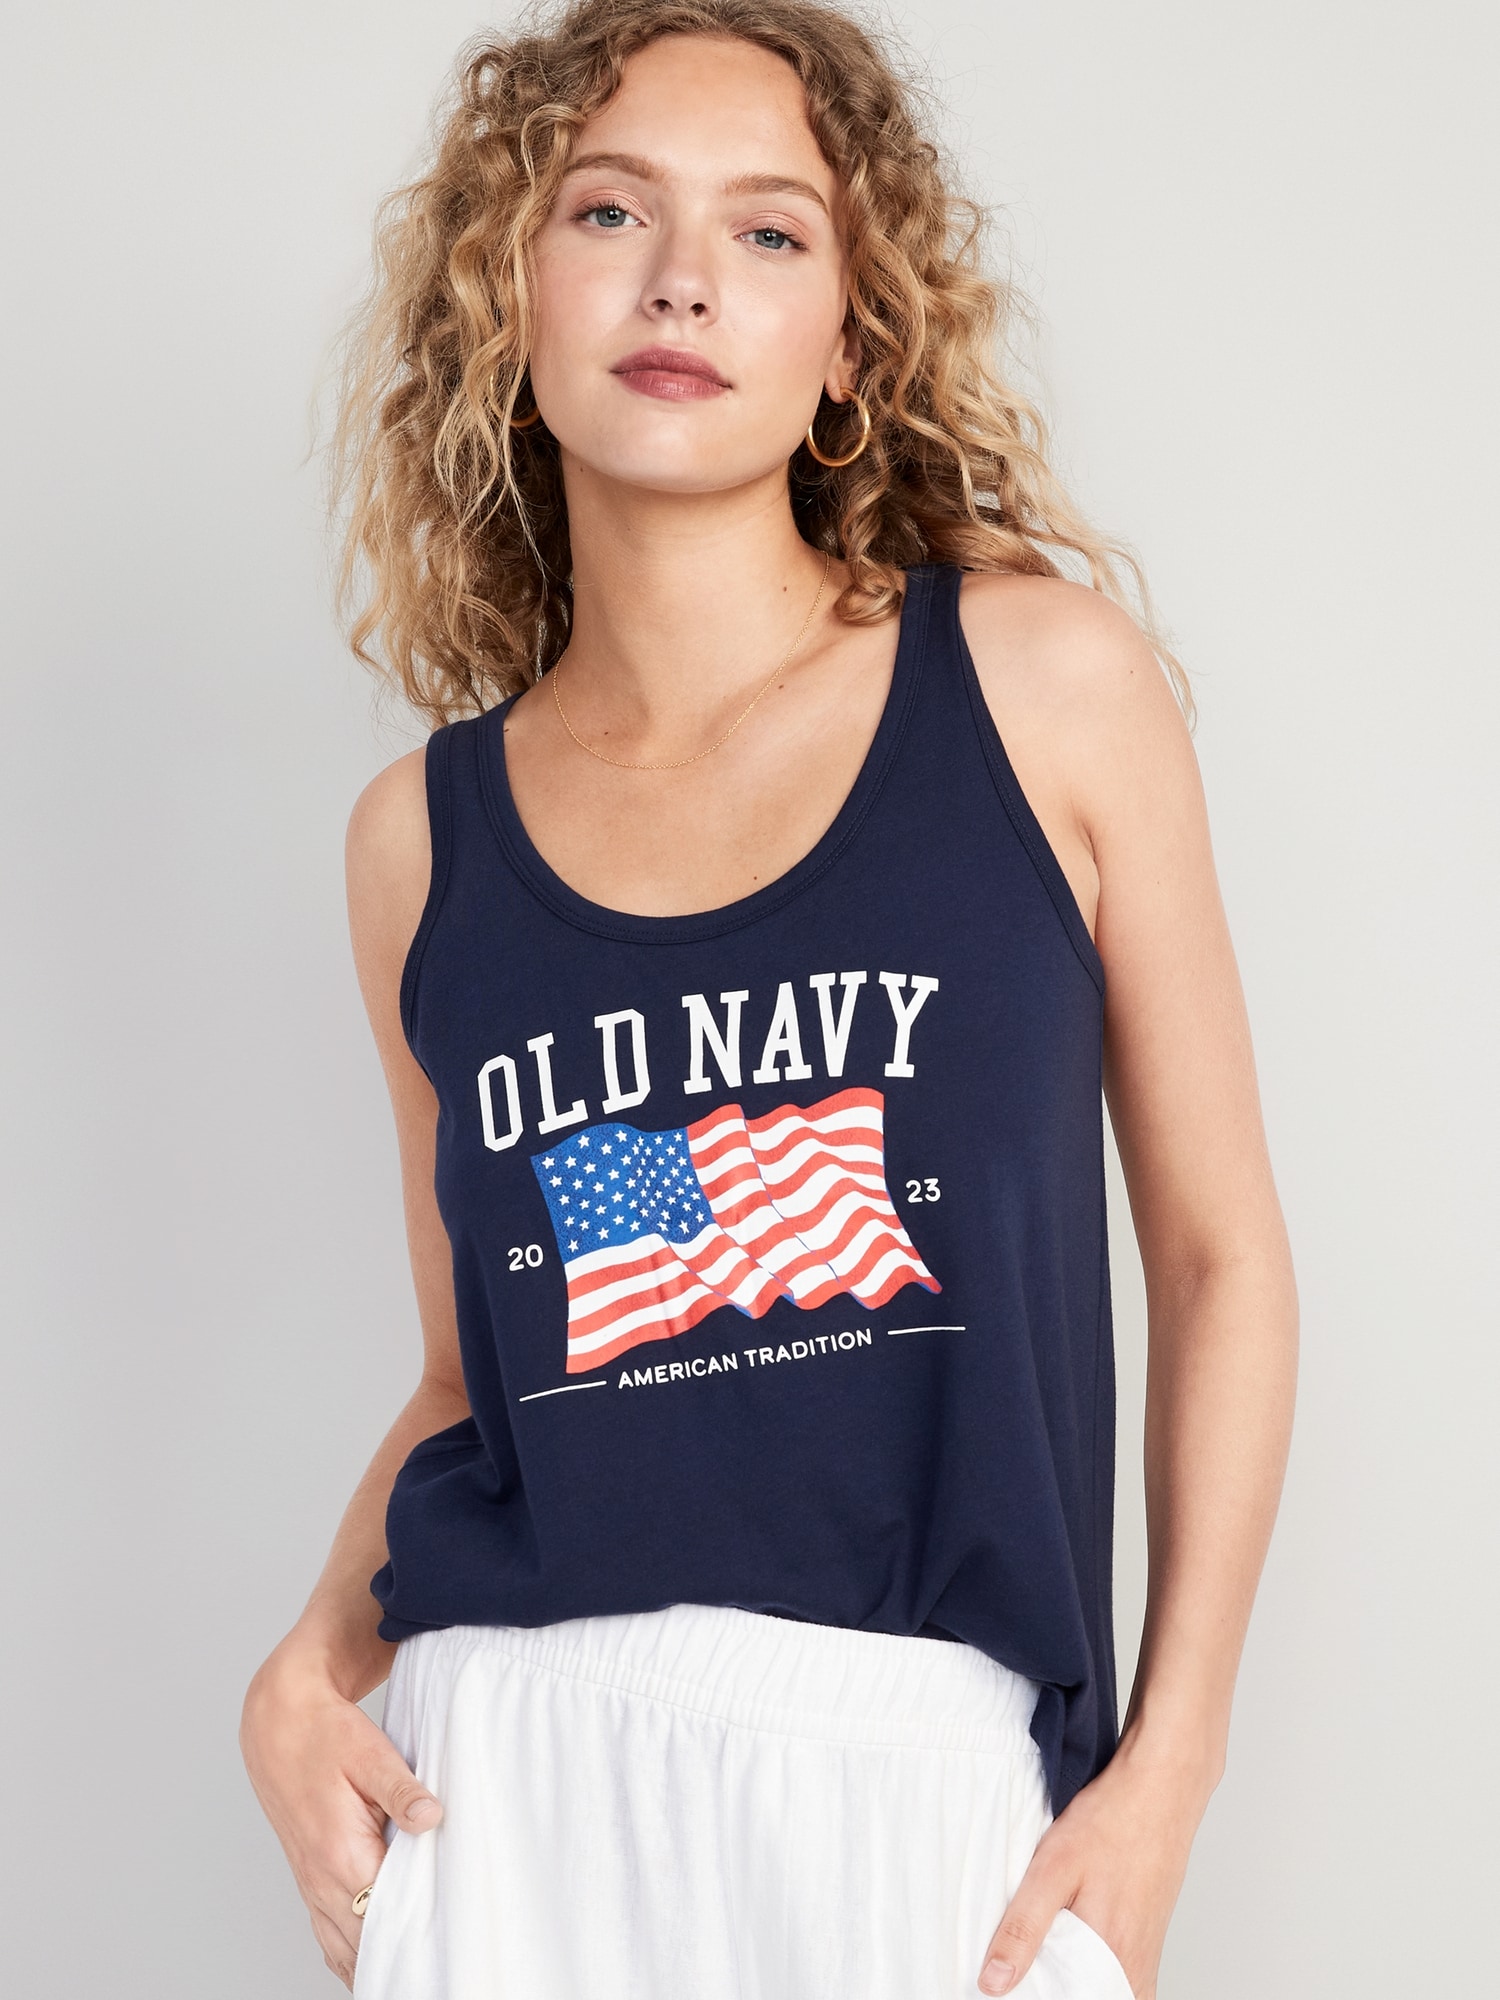 Old Navy Matching "Old Navy" Flag Tank Top for Women blue. 1